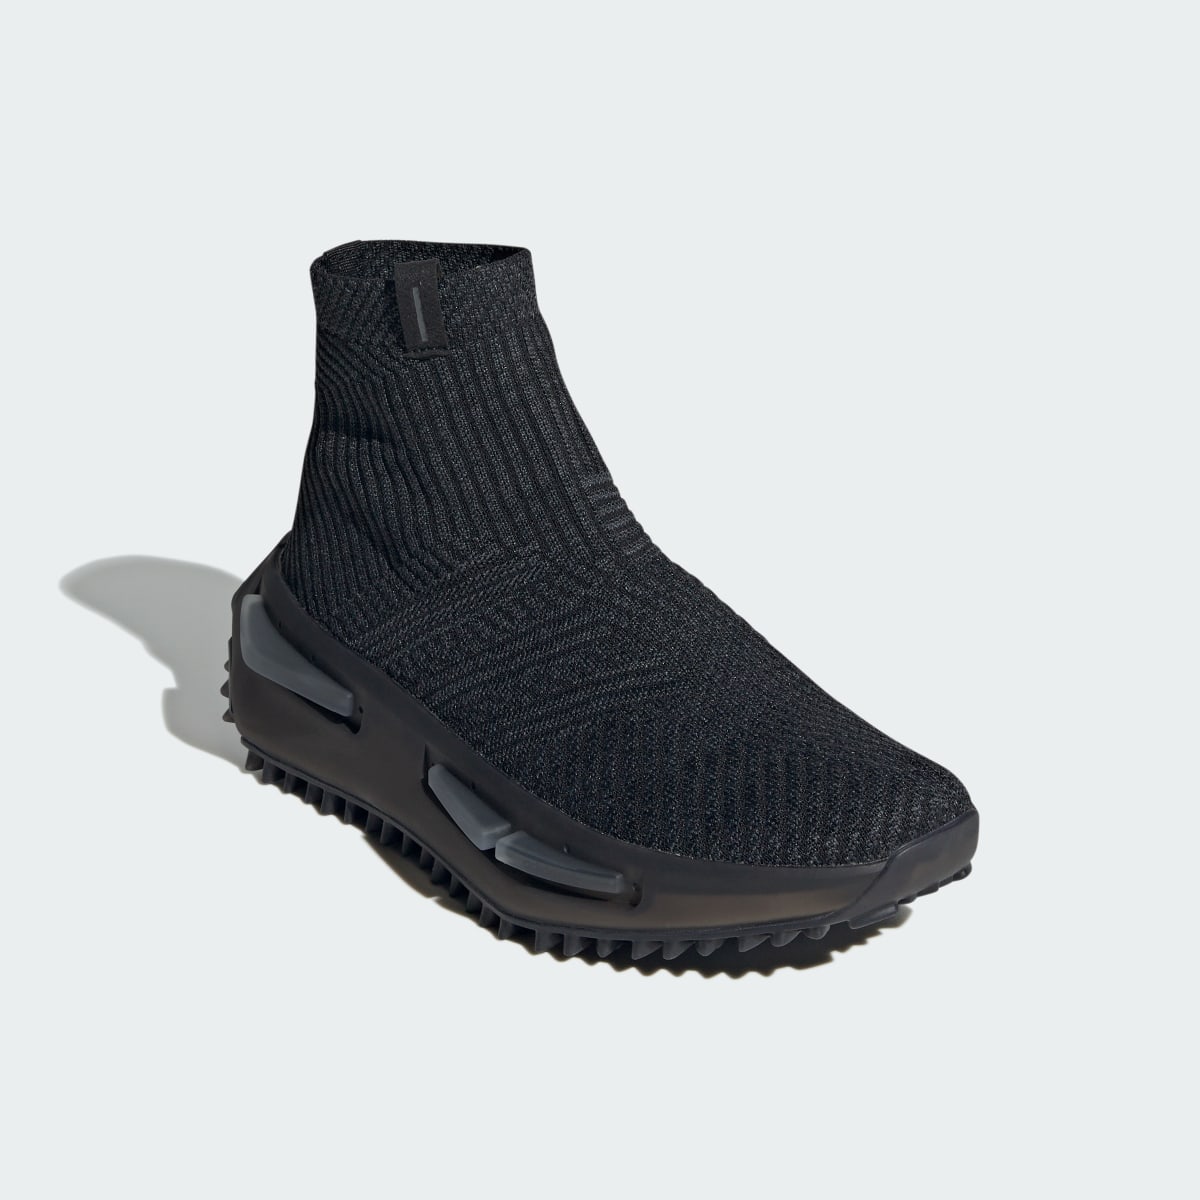 Adidas NMD_S1 Sock Shoes. 5